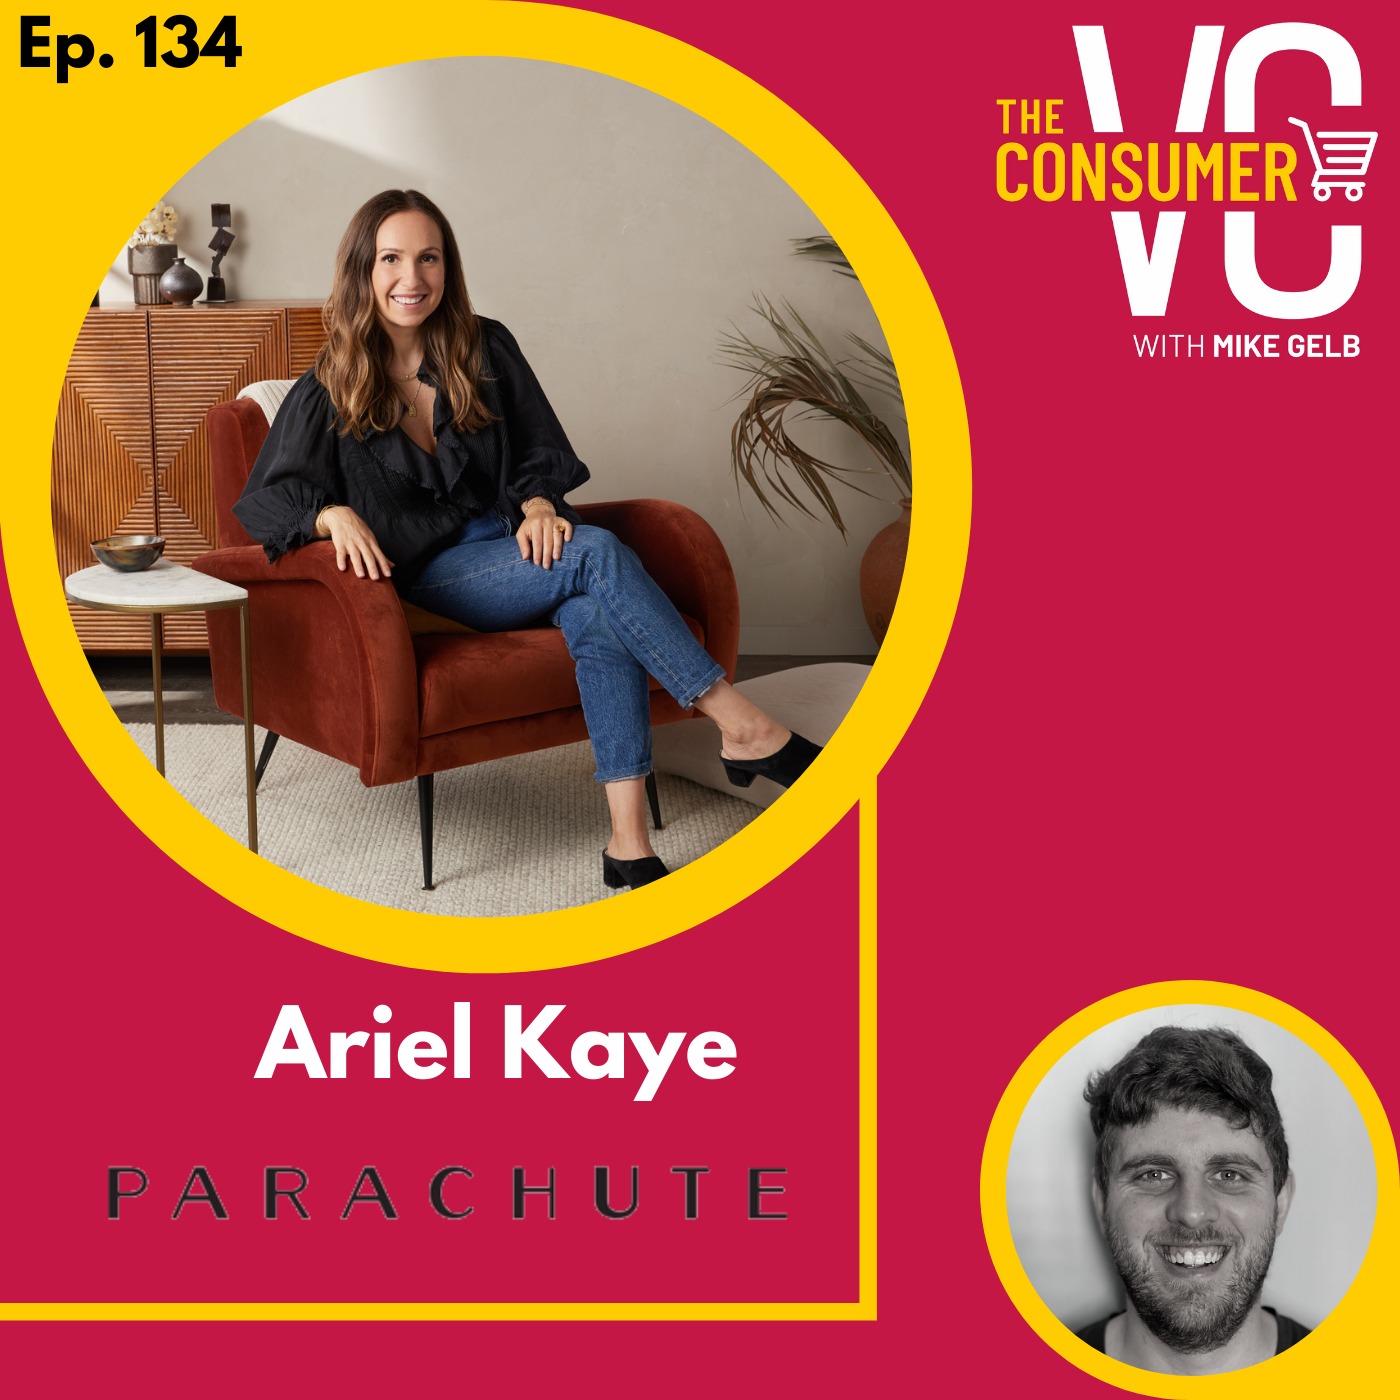 Ariel Kaye (Parachute) - Creating the leading brand in bedding and home decor Image